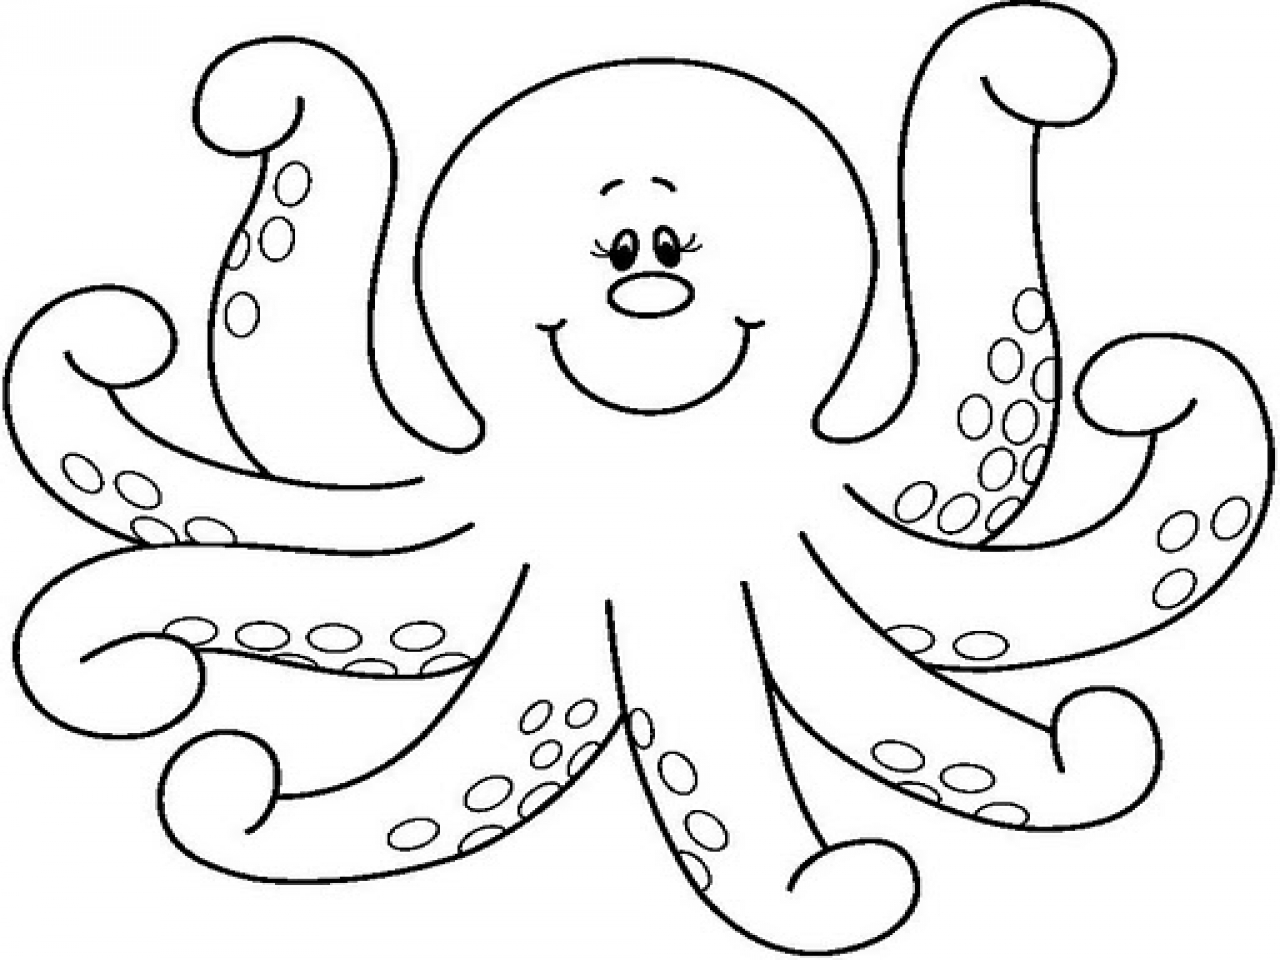 Free Octopus Clipart Black And White, Download Free Clip Art.